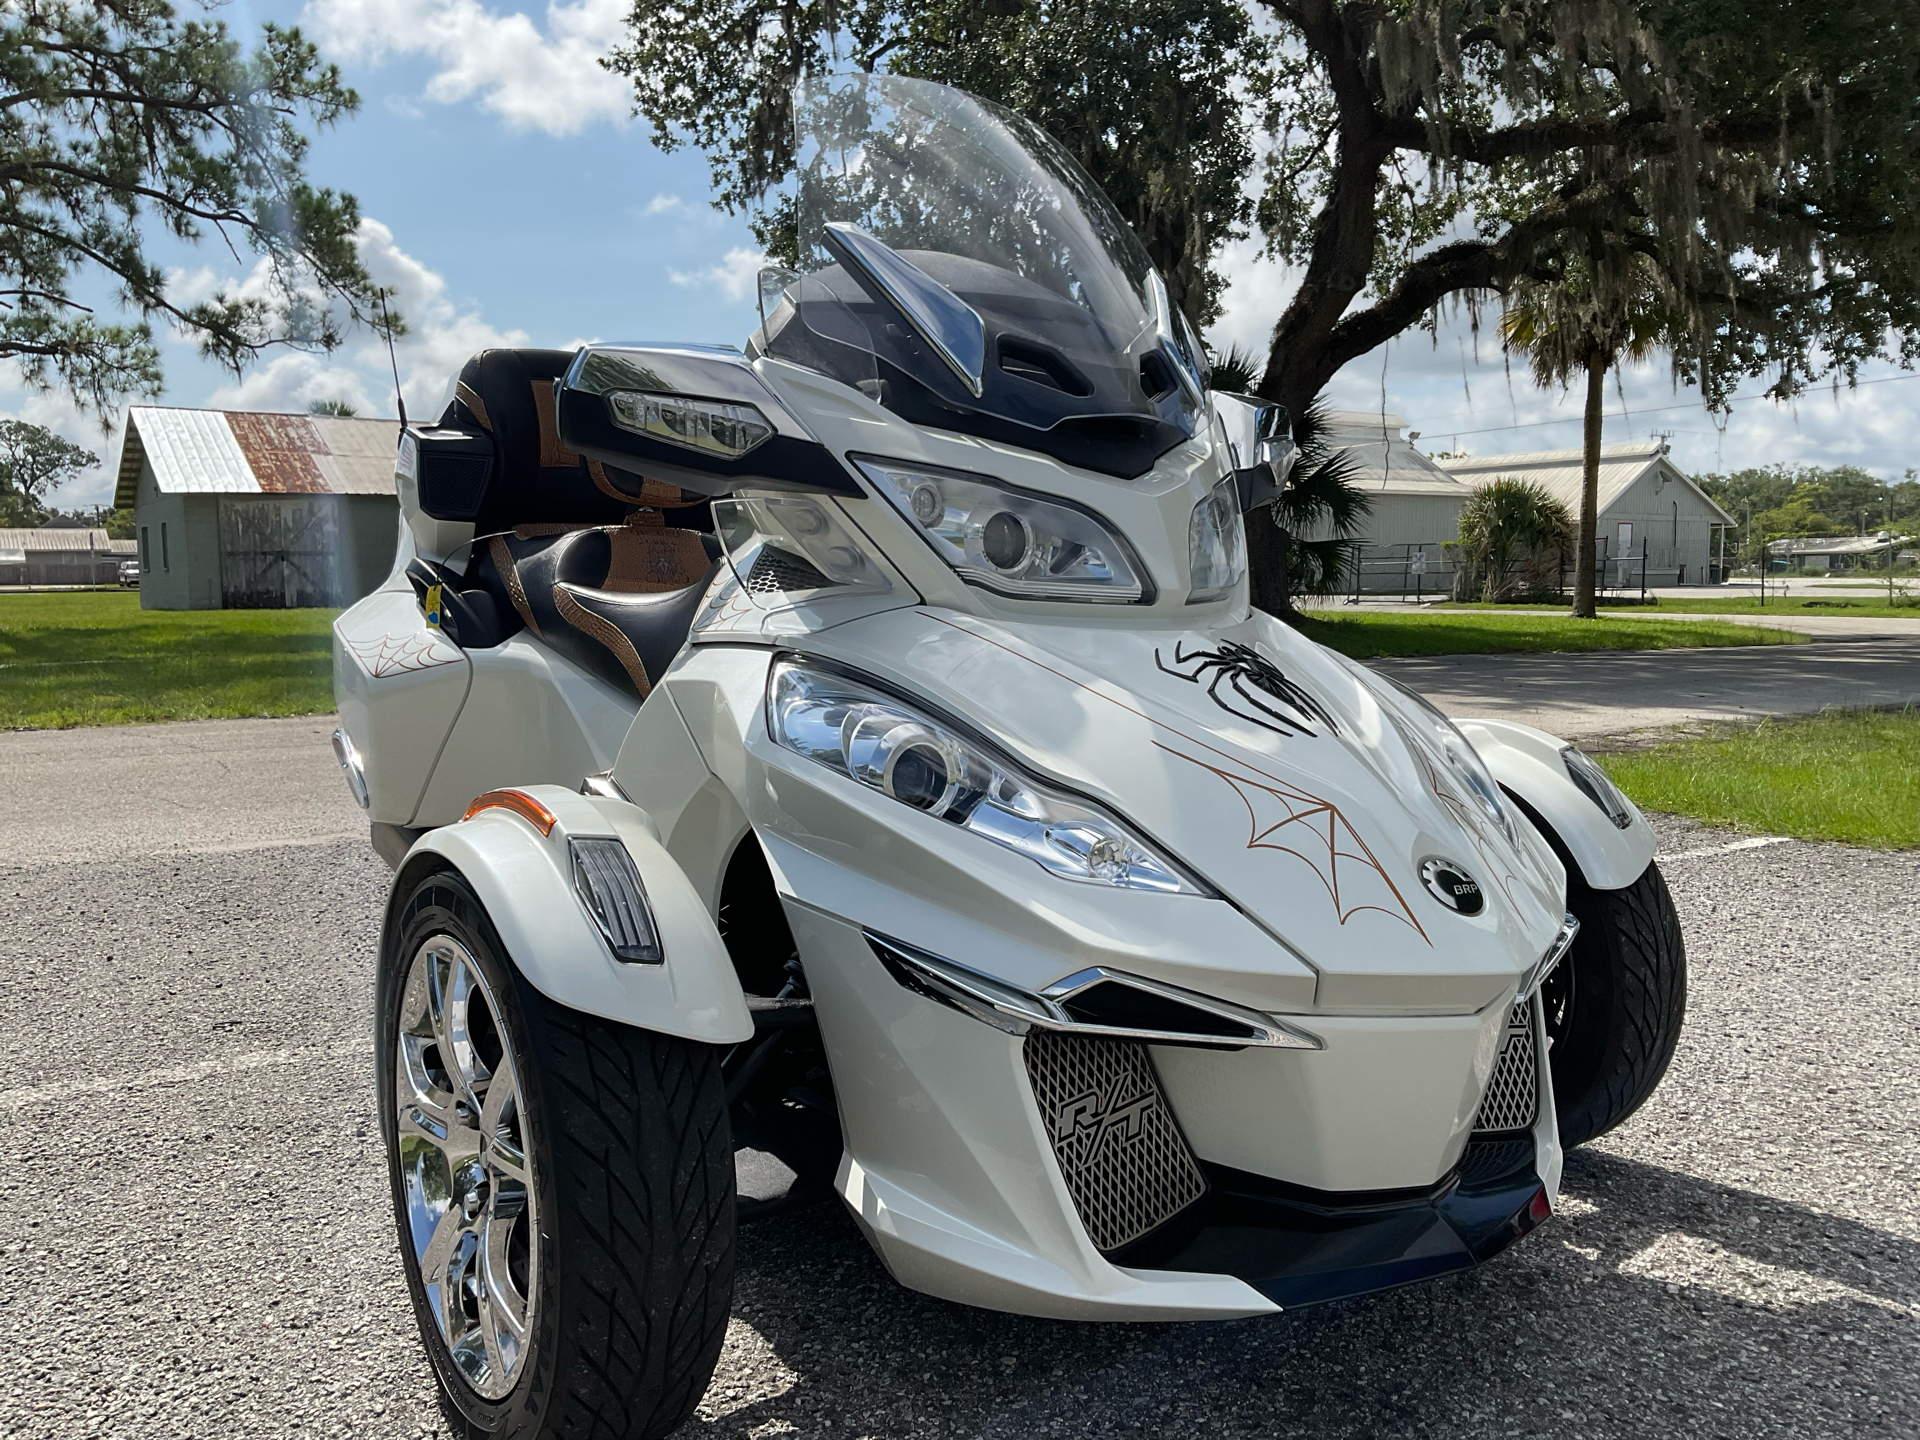 2019 Can-Am Spyder RT Limited in Sanford, Florida - Photo 3